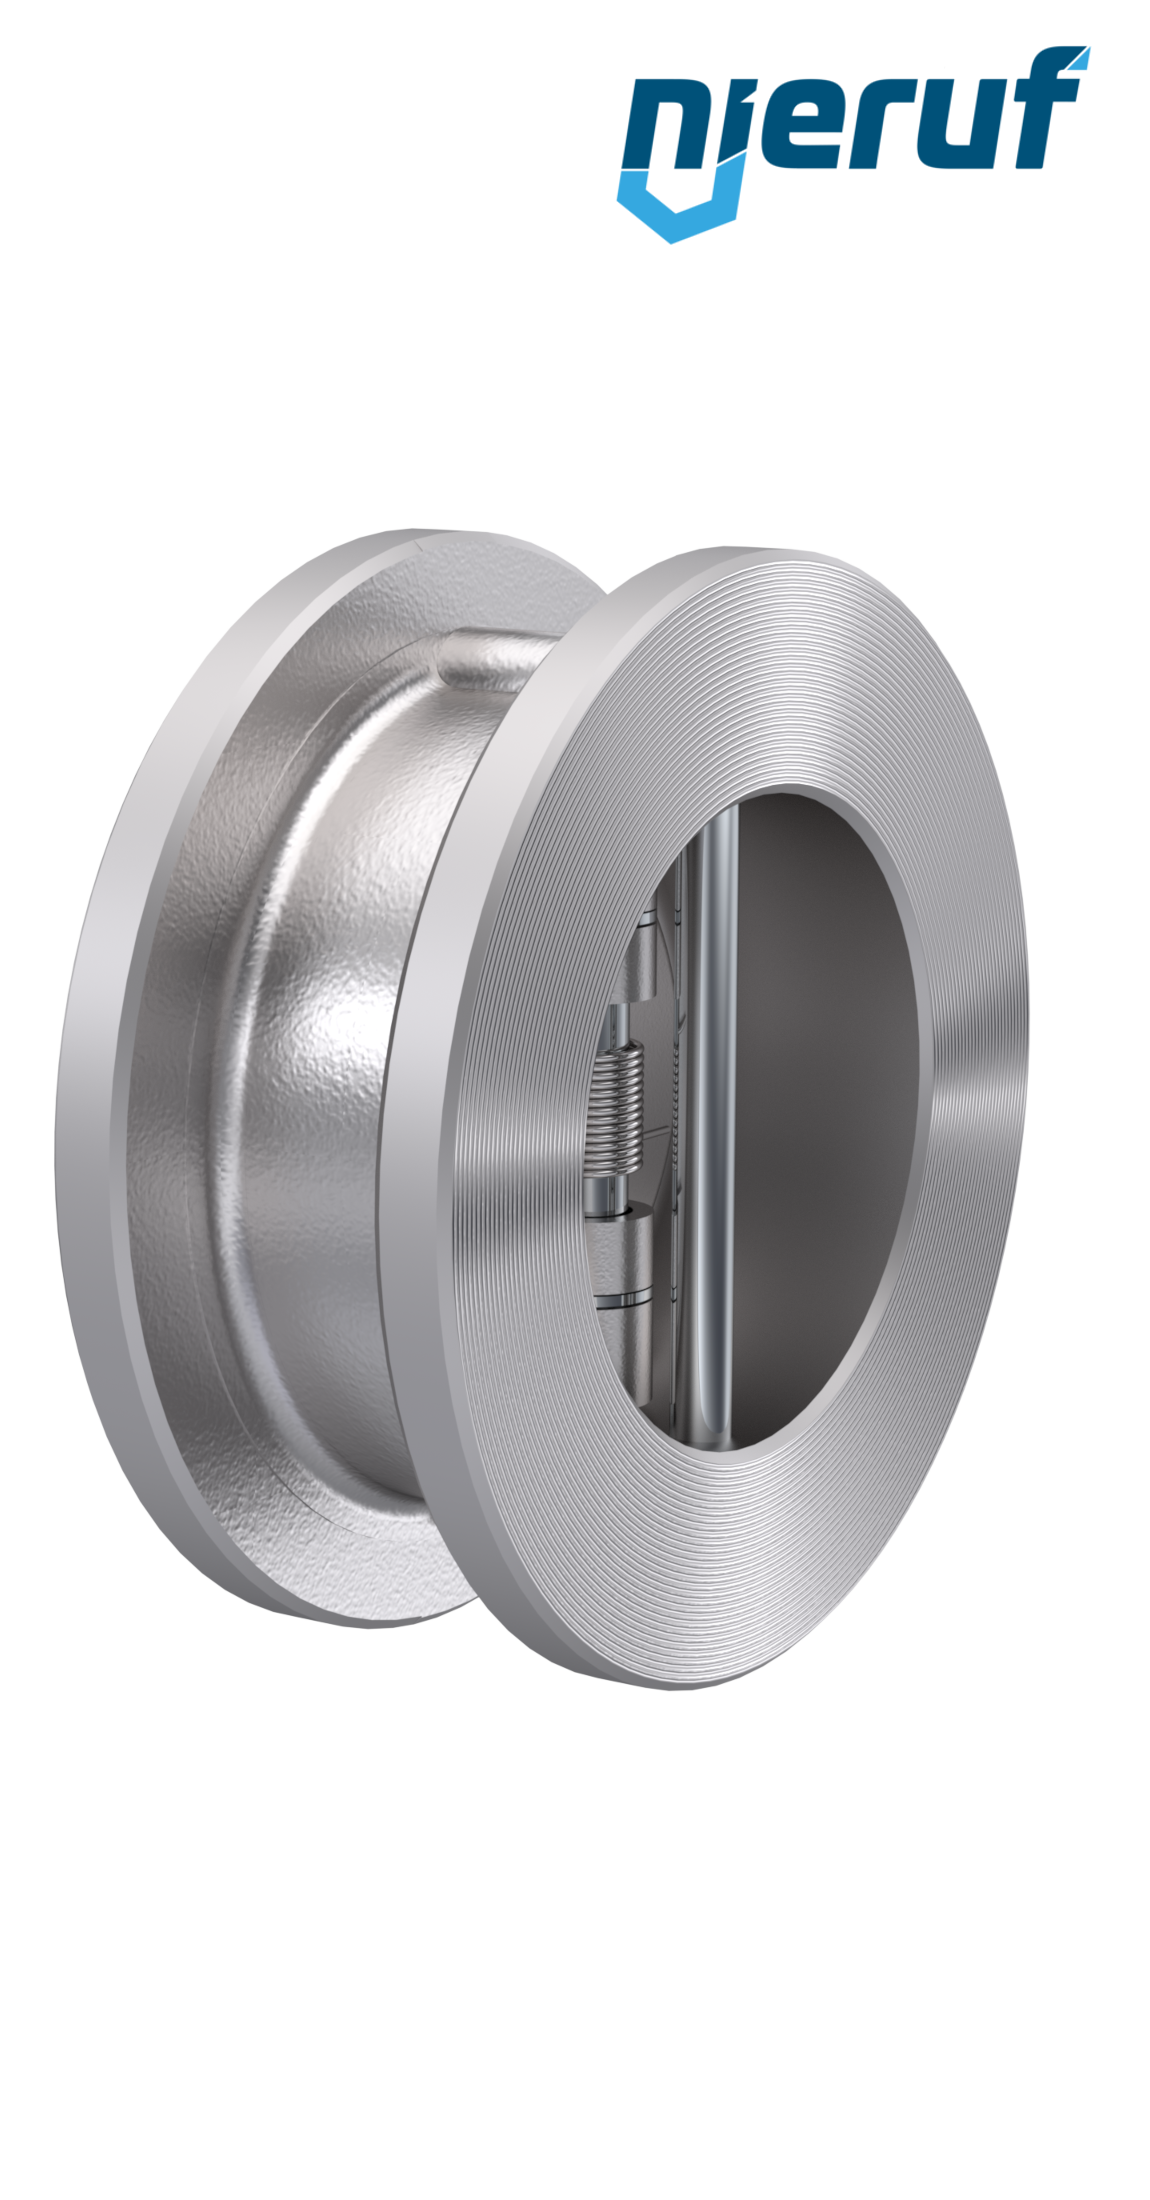 dual plate check valve DN400 DR03 ANSI 150 stainless steel 1.4408 metal